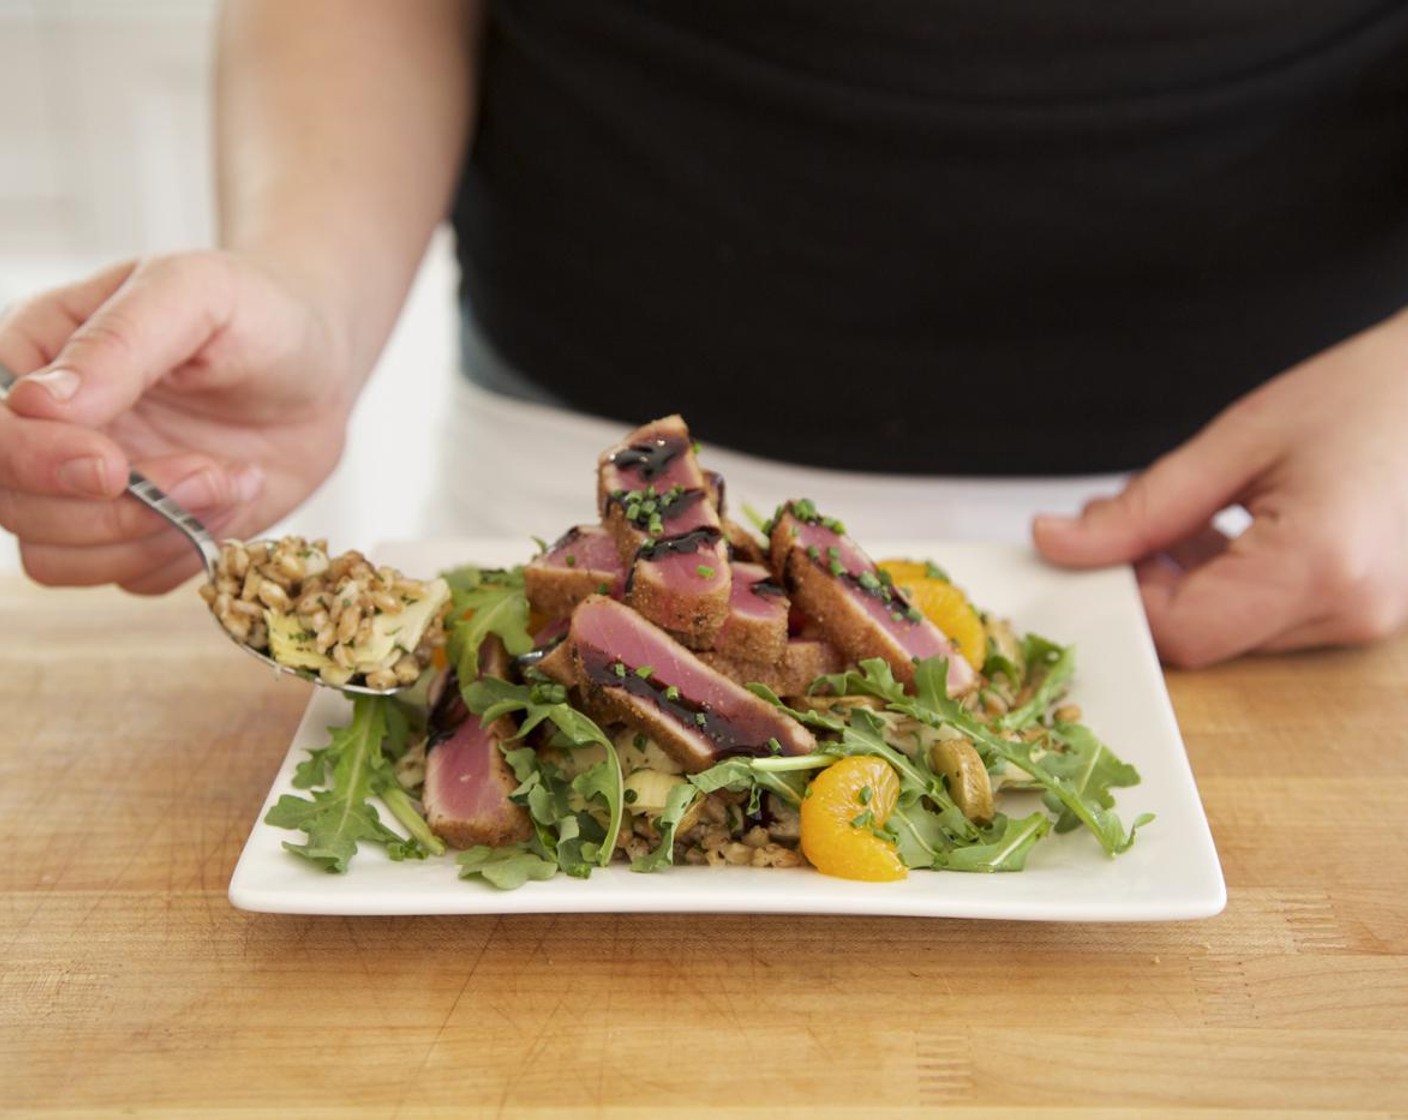 step 12 Top the salad with arugula salad. Present your sliced ahi on top of the warm farro pilaf and drizzle the Balsamic Reduction (2 Tbsp) over the ahi and around the plate for garnish. Garnish with chives. Serve and enjoy!